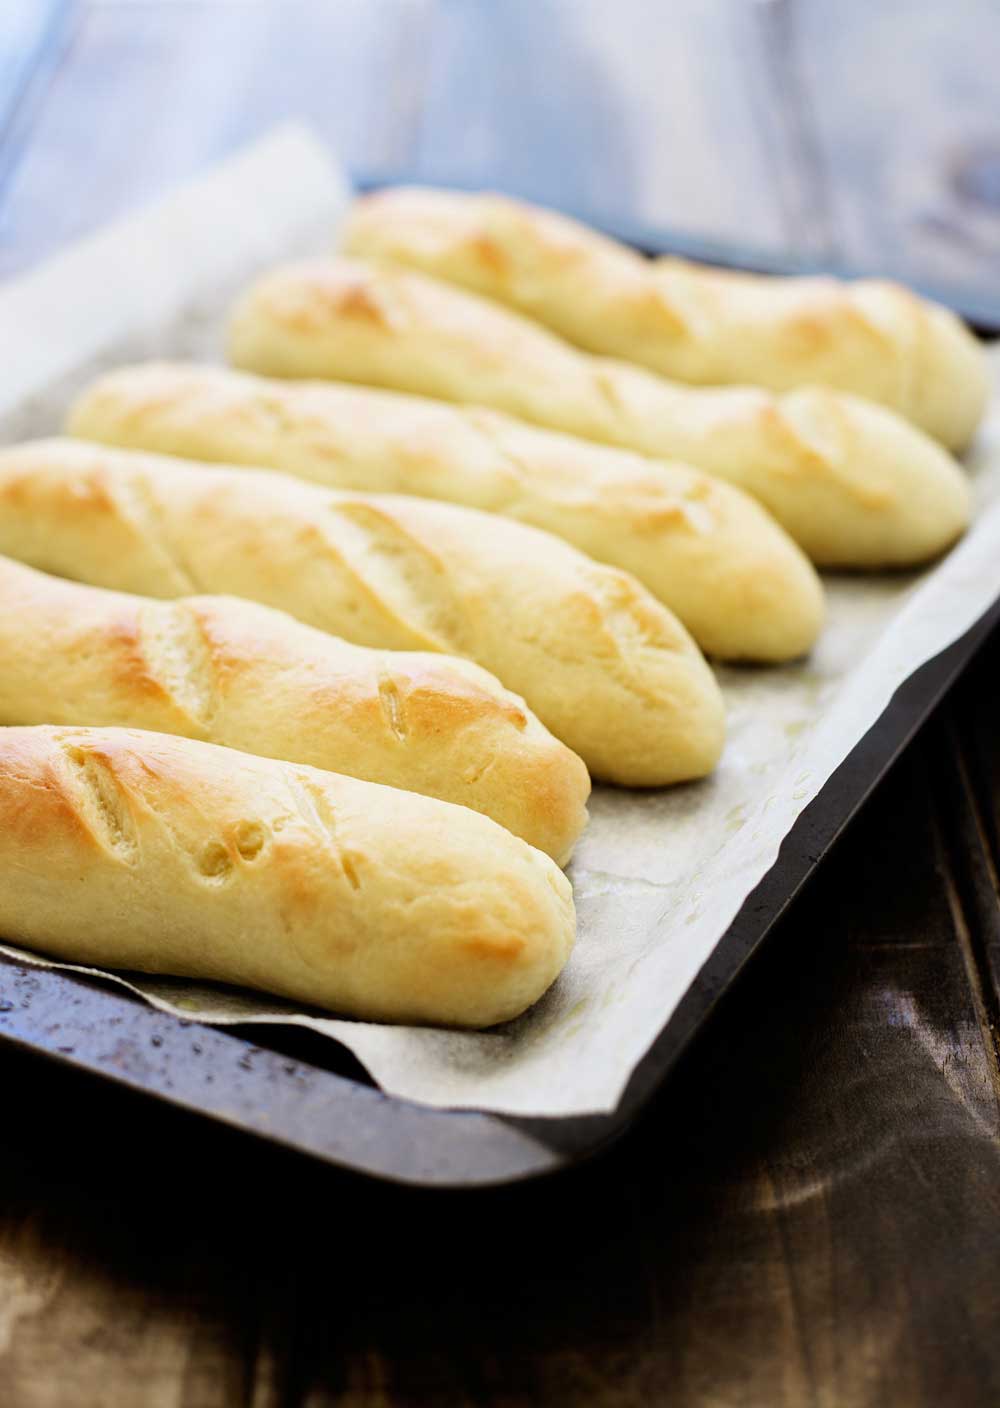 Soft, fluffy and buttery breadsticks. You'll be amazed how simple it it to have restaurant quality fresh bread at home with my secret but simple final step.